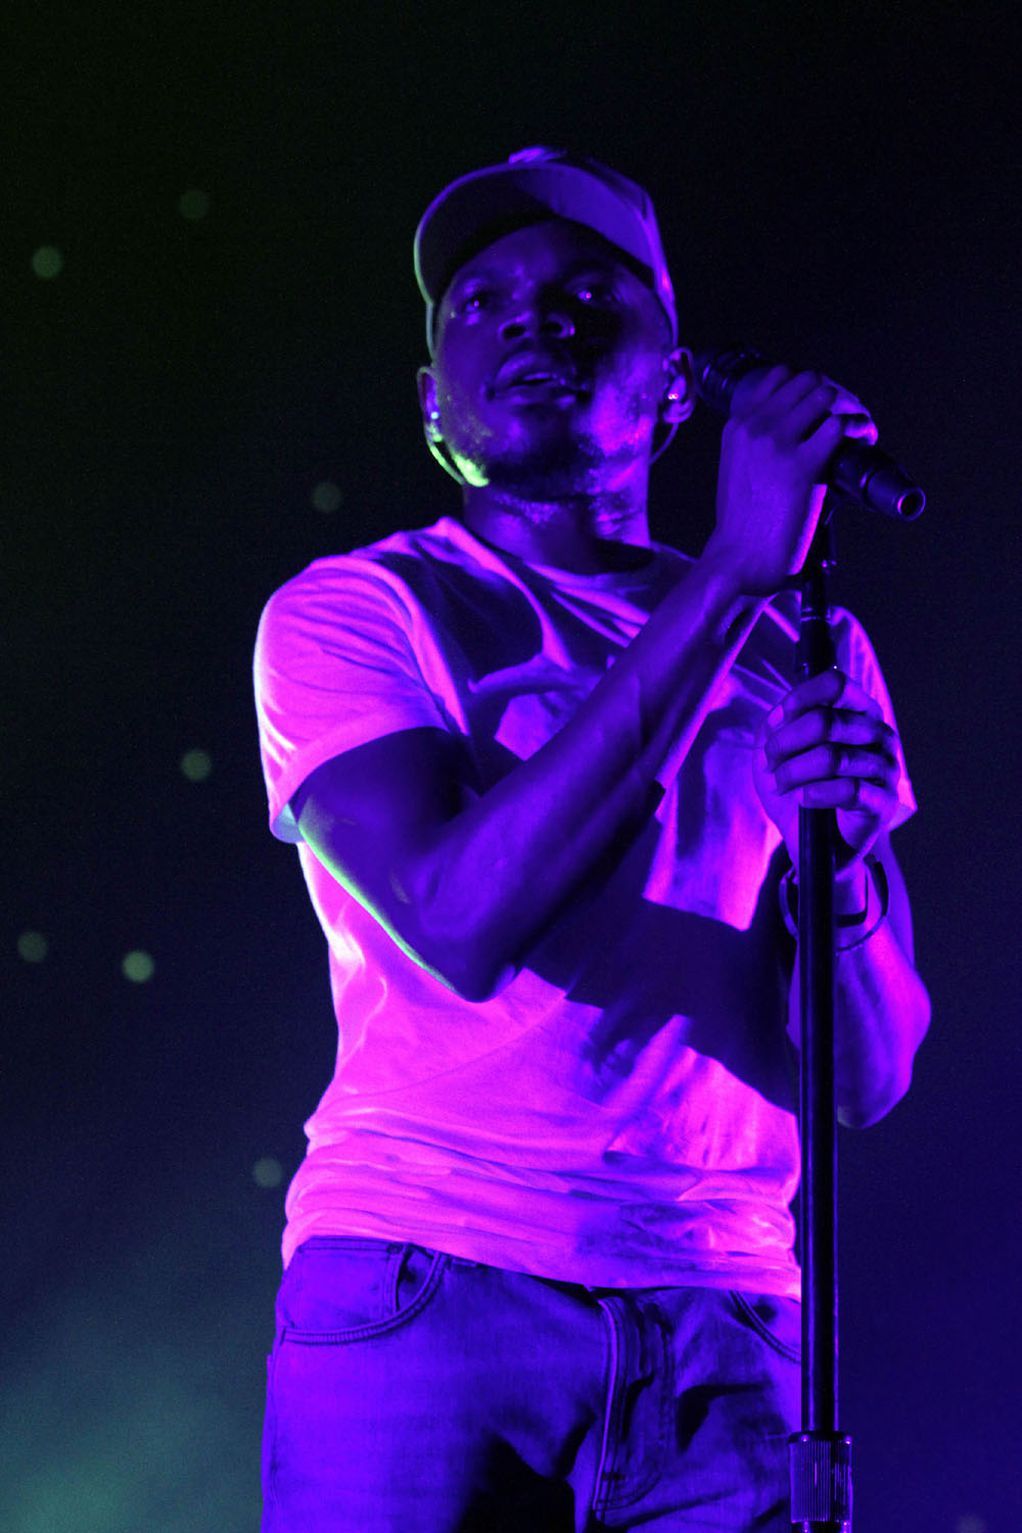 Concert Review: Chance The Rapper Returns To Atlanta For Celebratory Sold Out Show